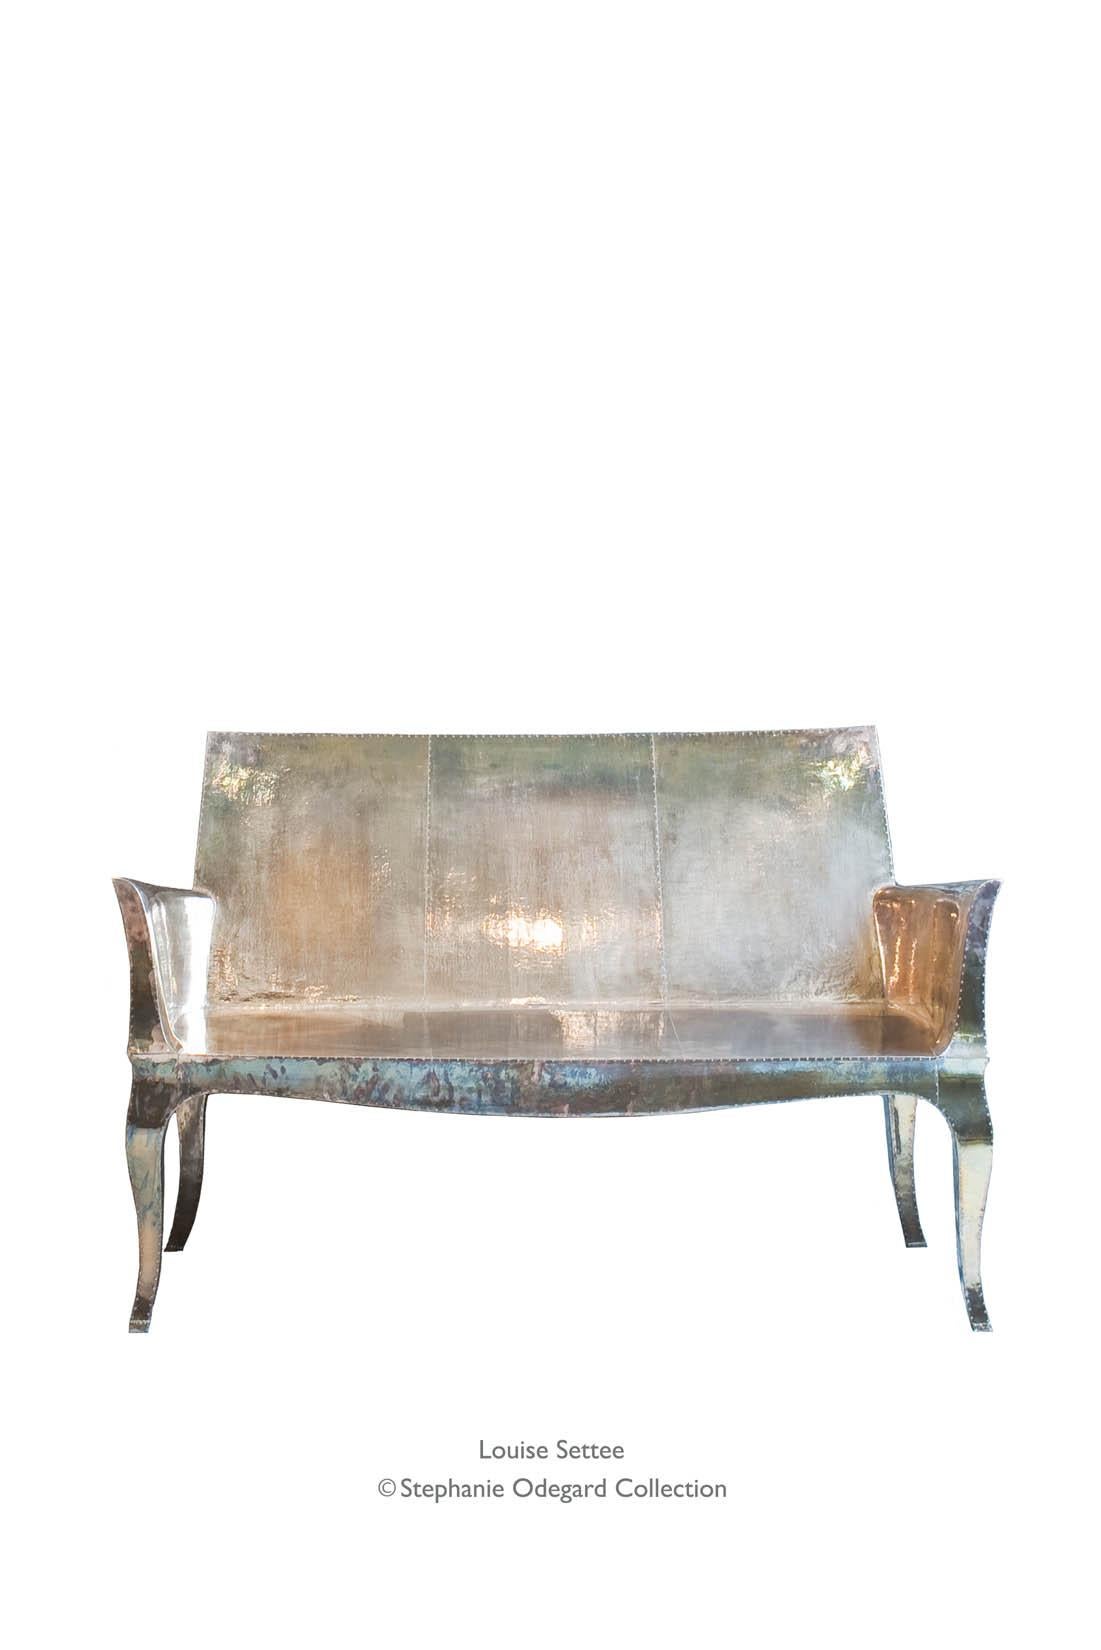 Louise Settee Art Deco Canapes in Smooth Copper by Paul Mathieu for S Odegard For Sale 7